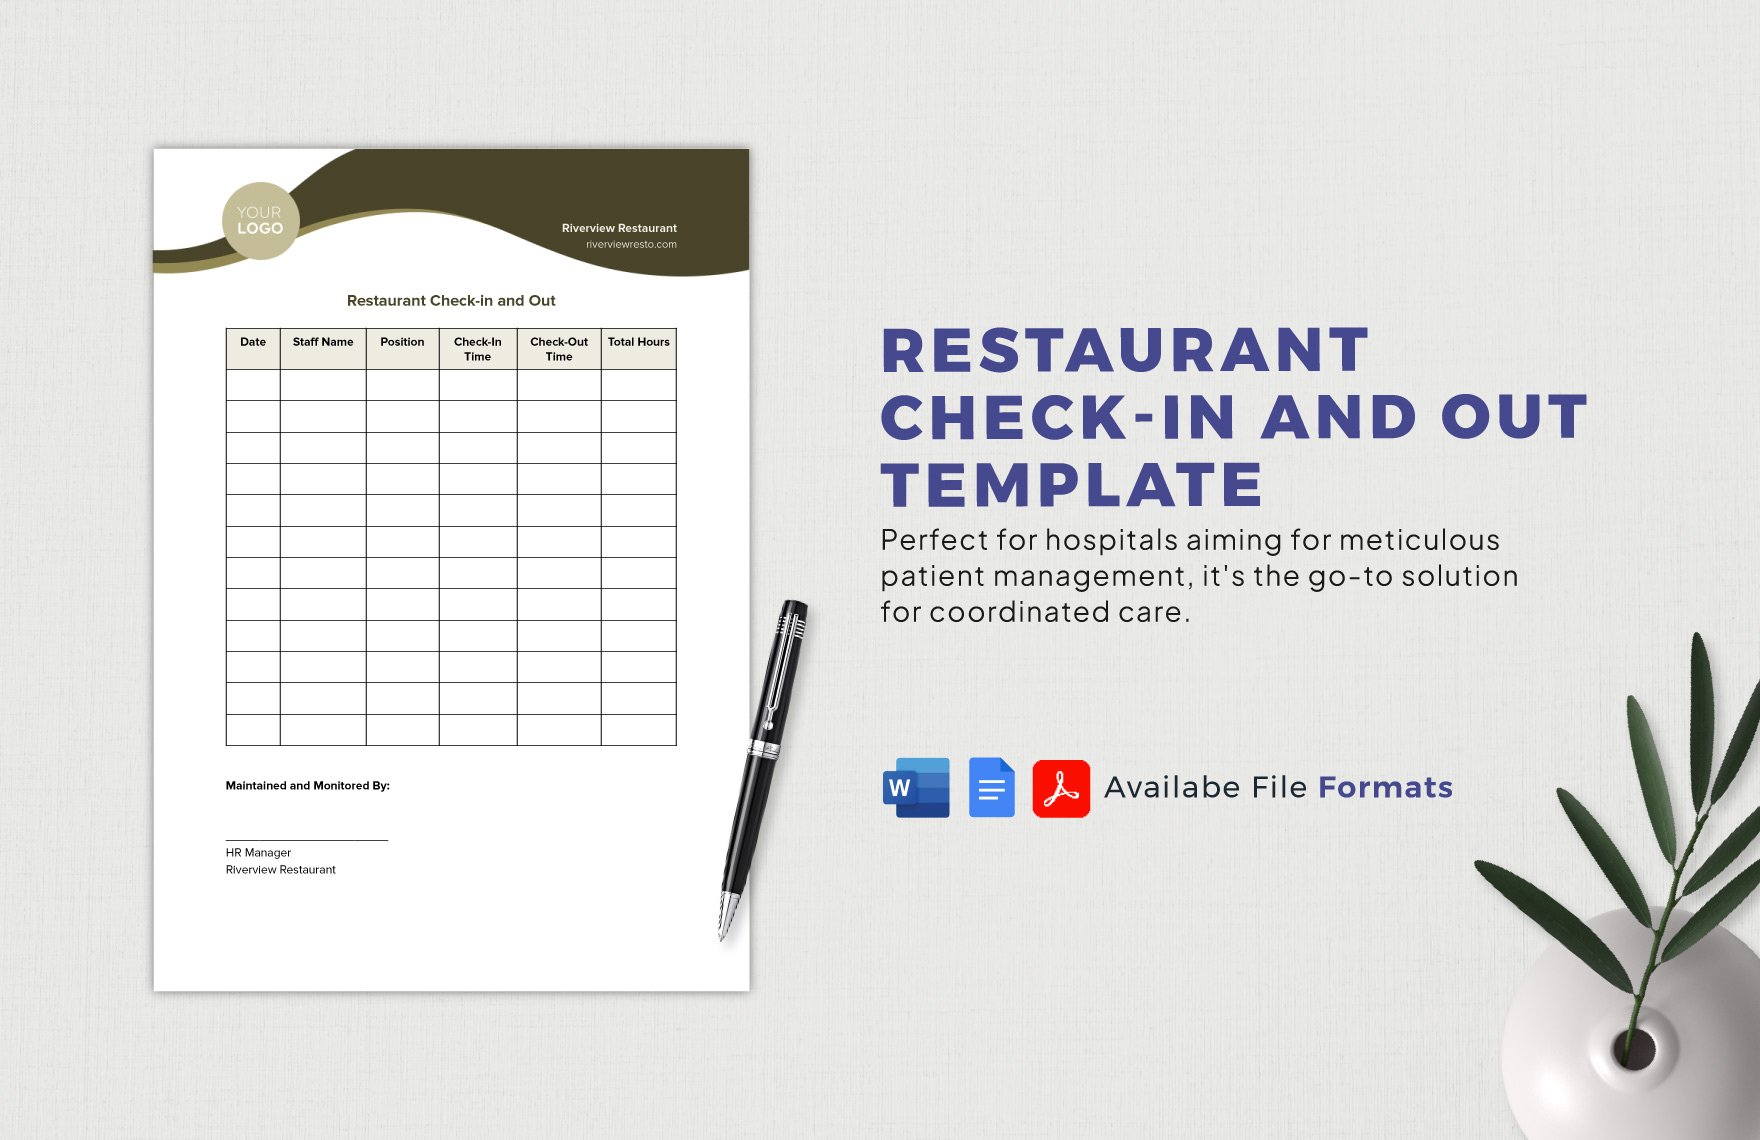 Restaurant Check-in and Out Template